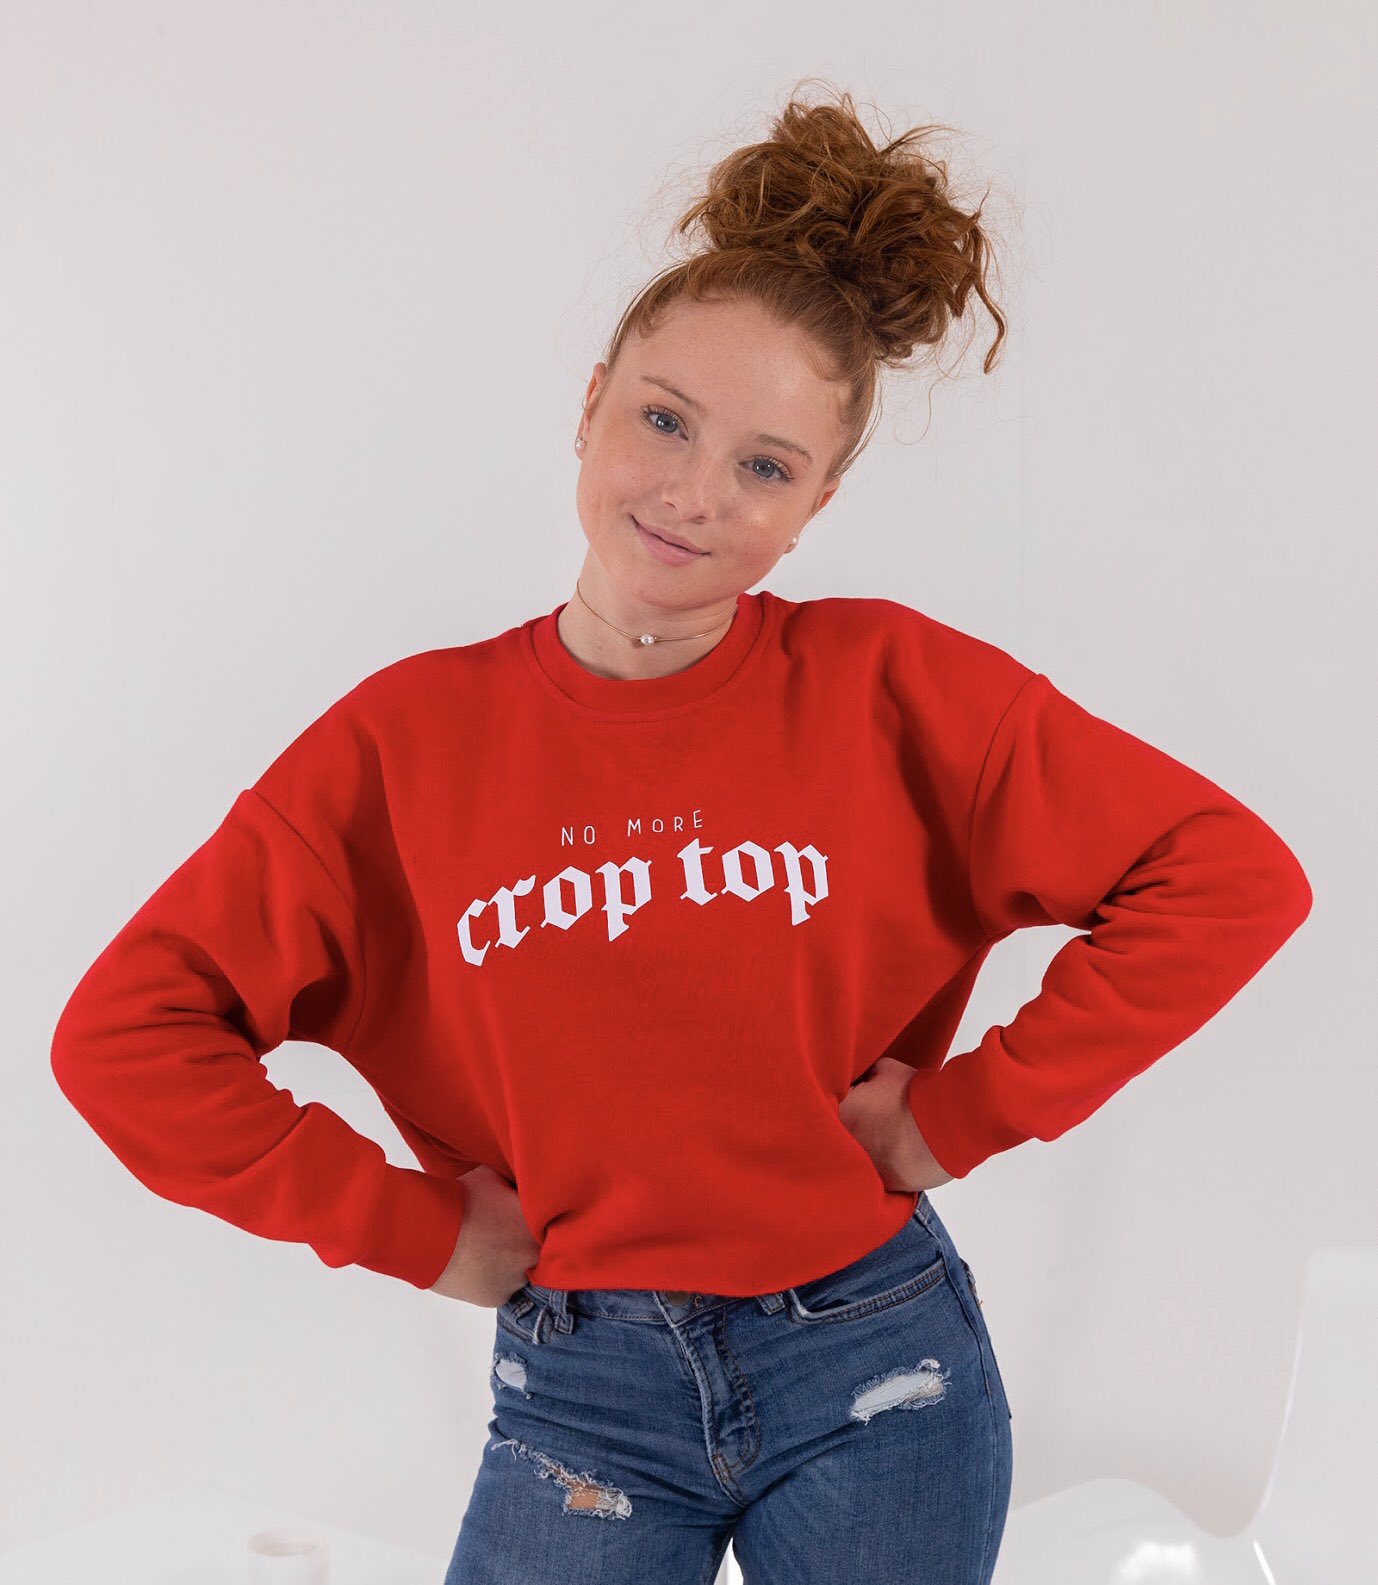 Don't Call Me Jennyfer on "🔥 DAY 3 #ANTIRESOLUTIONS @ ilonaaln x D.C.M Jennyfer 🔥 Le troisième sweat #ANTIRESOLUTIONS is out with notre belle Ilona accro aux crop tops ! 😍